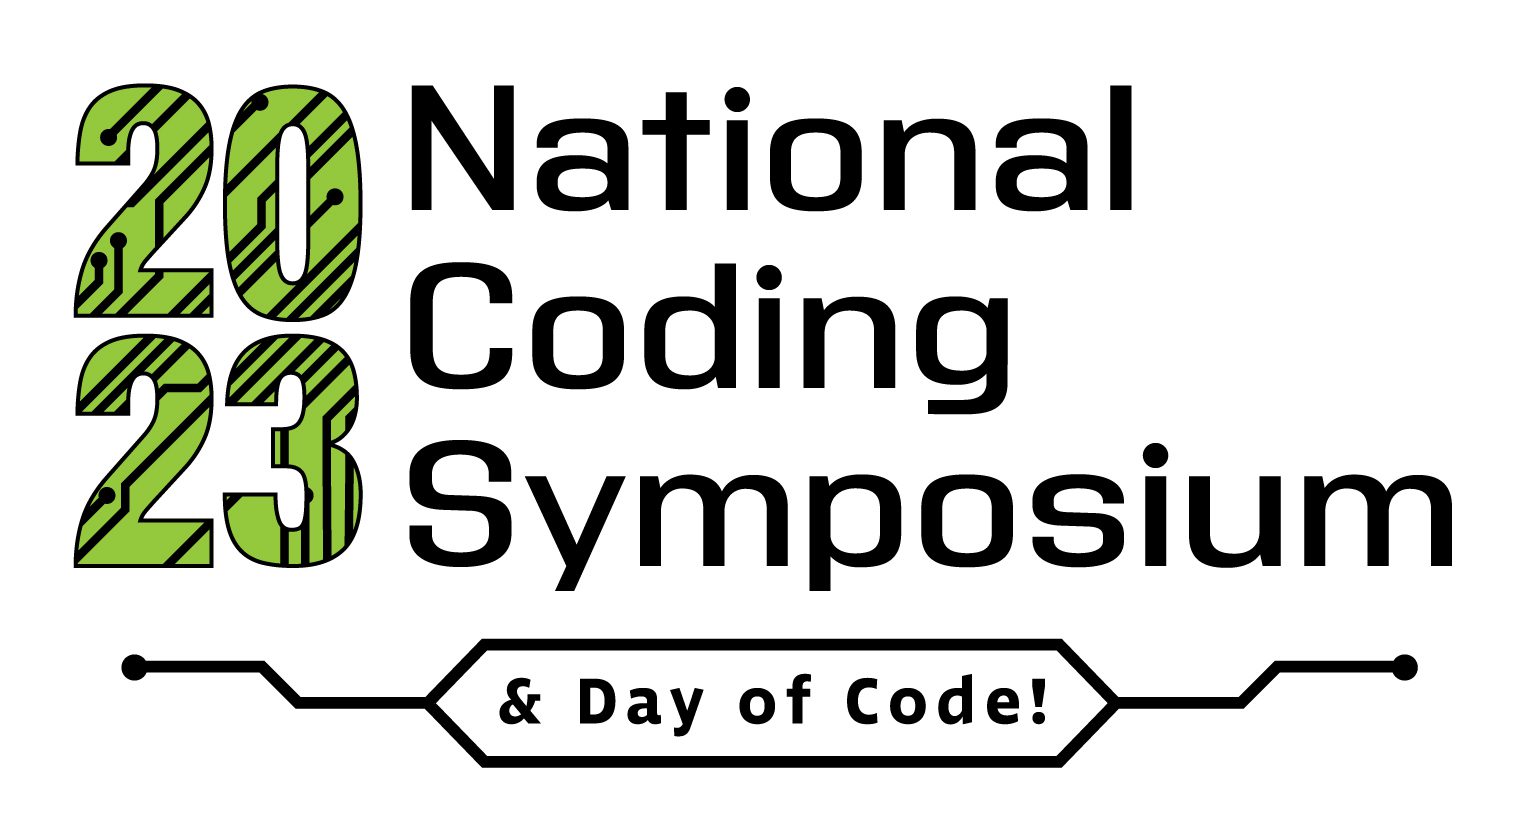 2023 National Coding Symposium logo. The numbers “2023” are light green and have a dark green circuit board pattern across them. Text below reads “& Day of Code!"